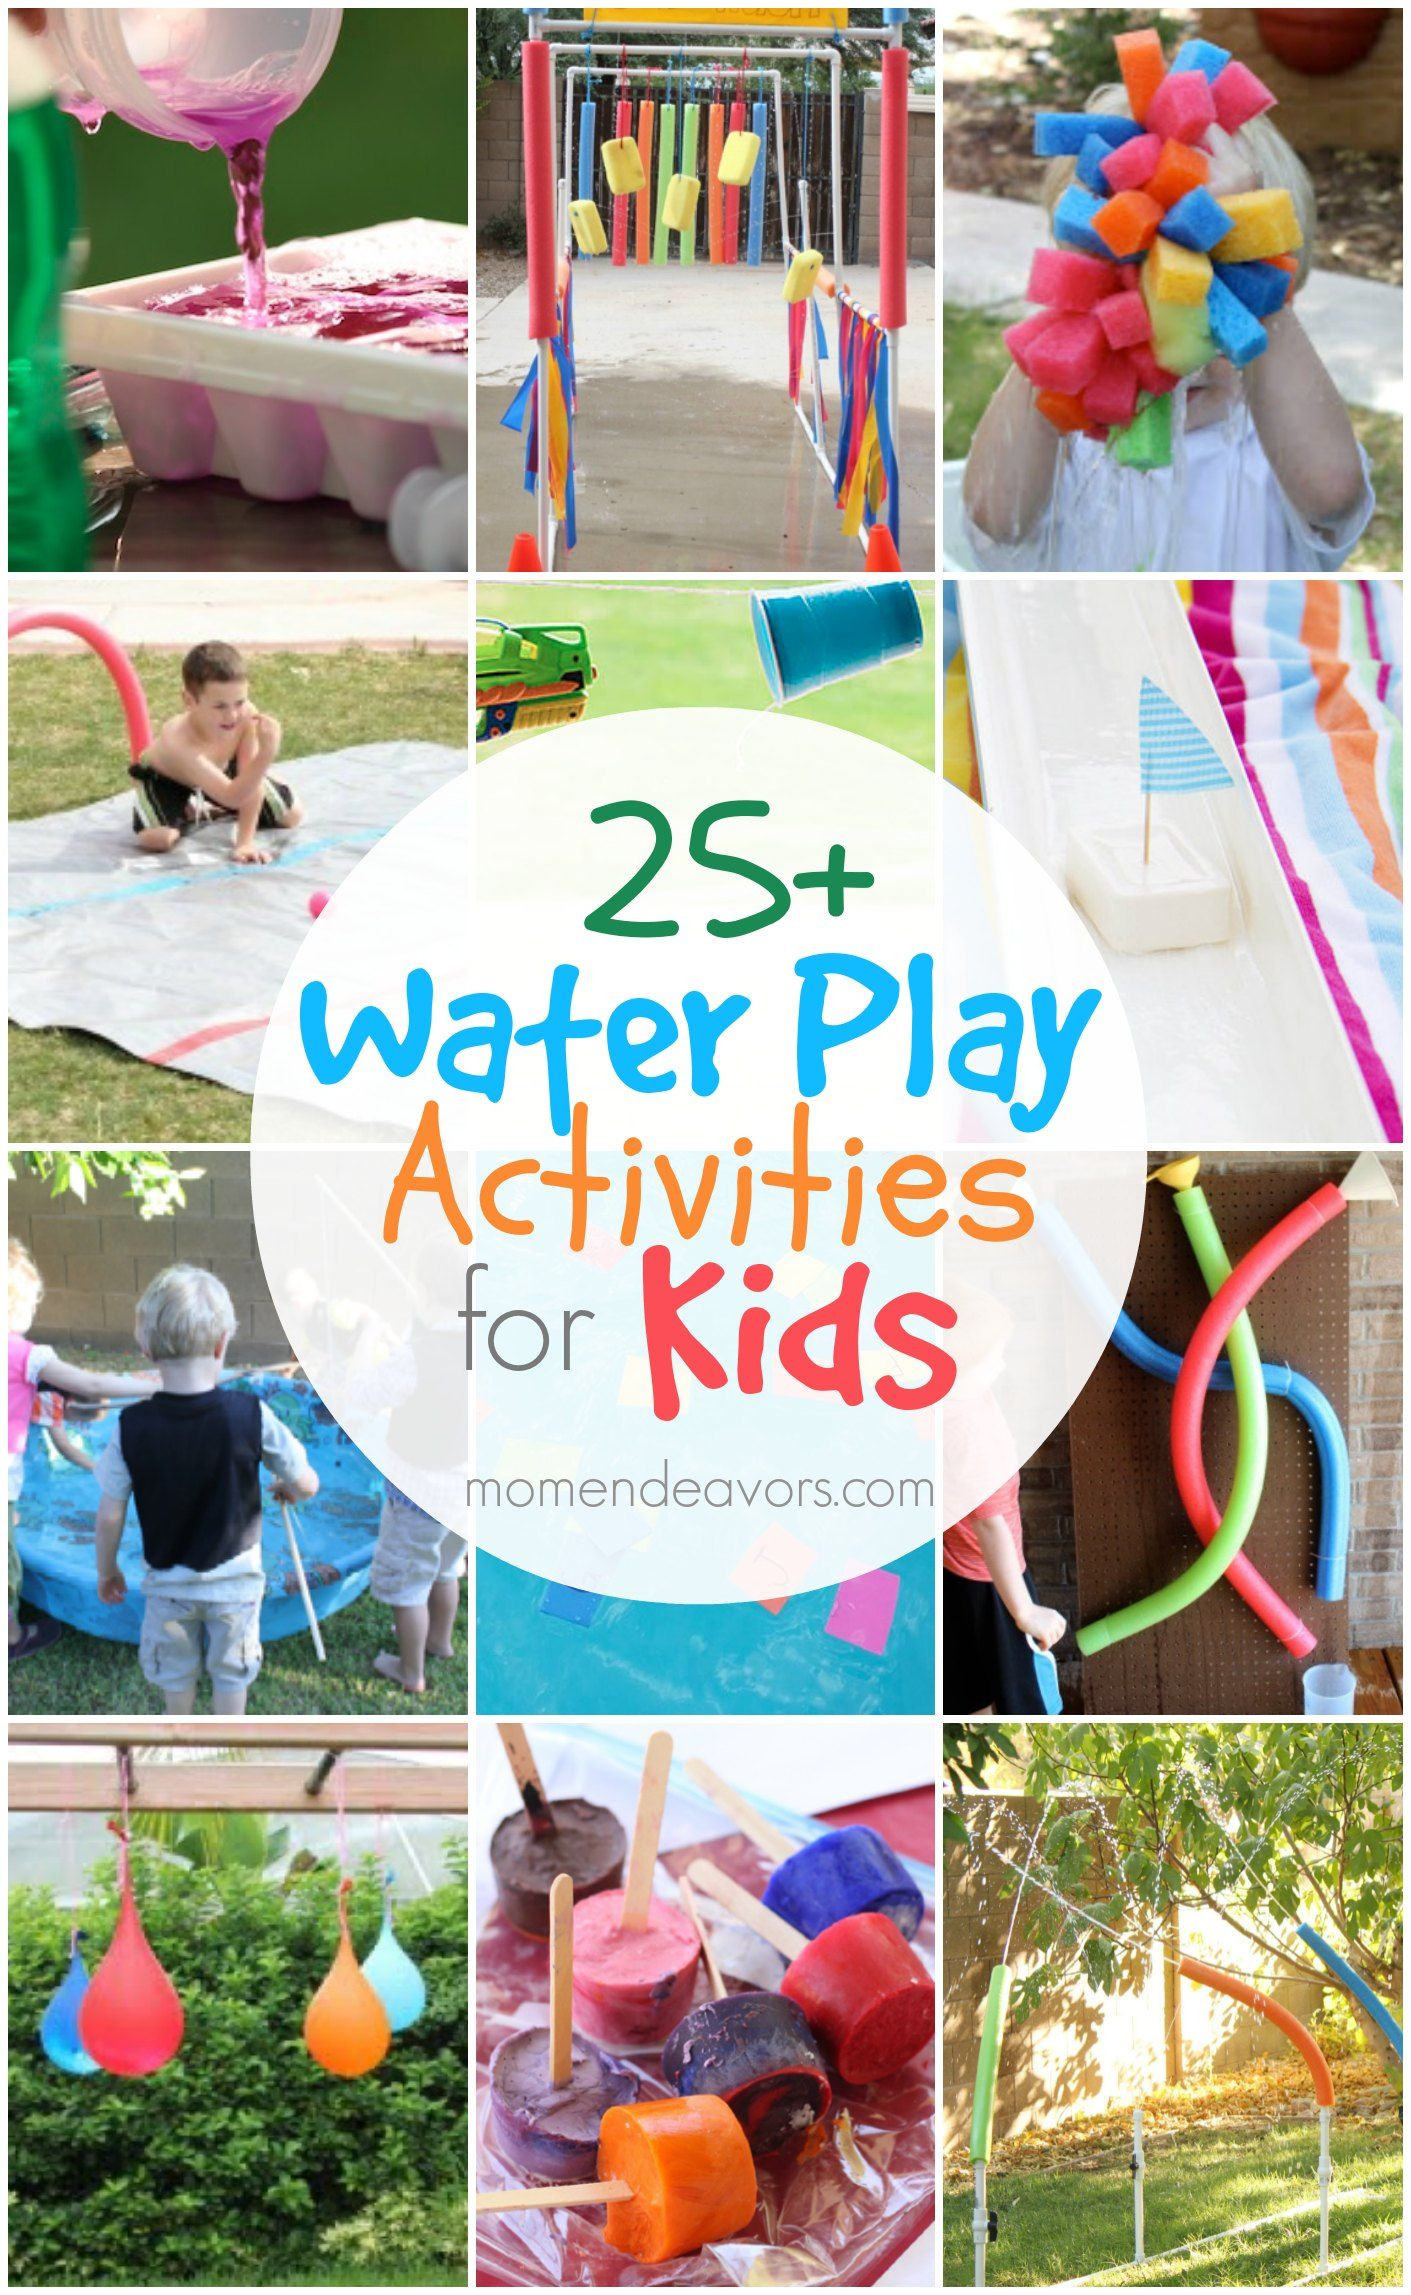 Summer Gifts For Kids
 25 Outdoor Water Play Activities for Kids so many fun